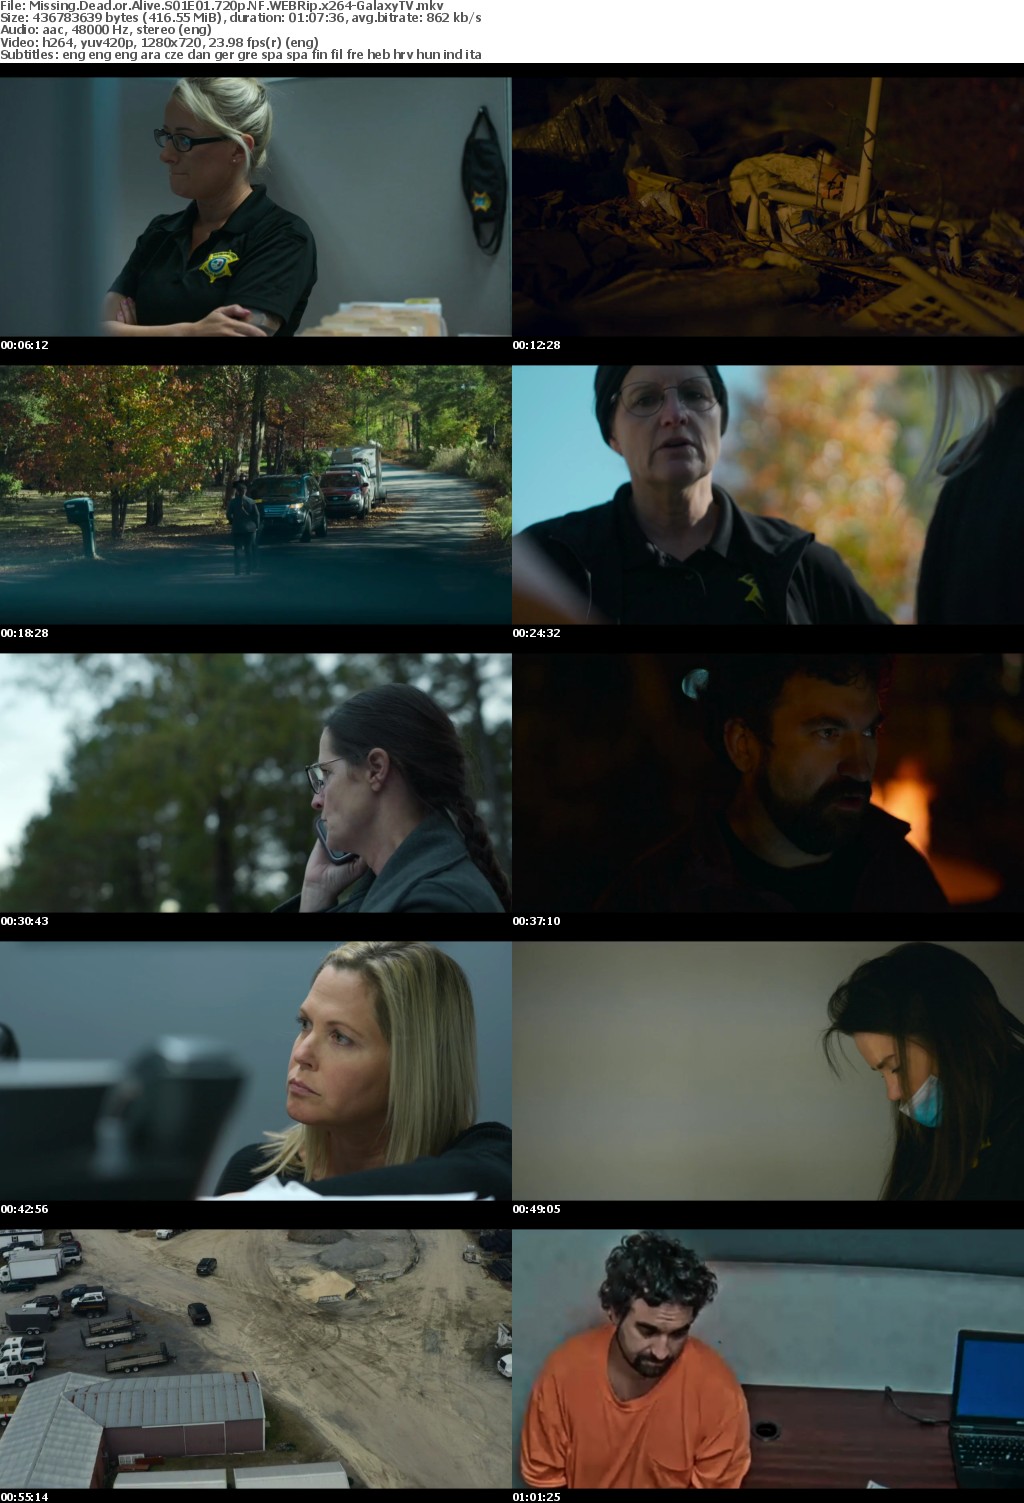 Missing Dead or Alive S01 COMPLETE 720p NF WEBRip x264-GalaxyTV